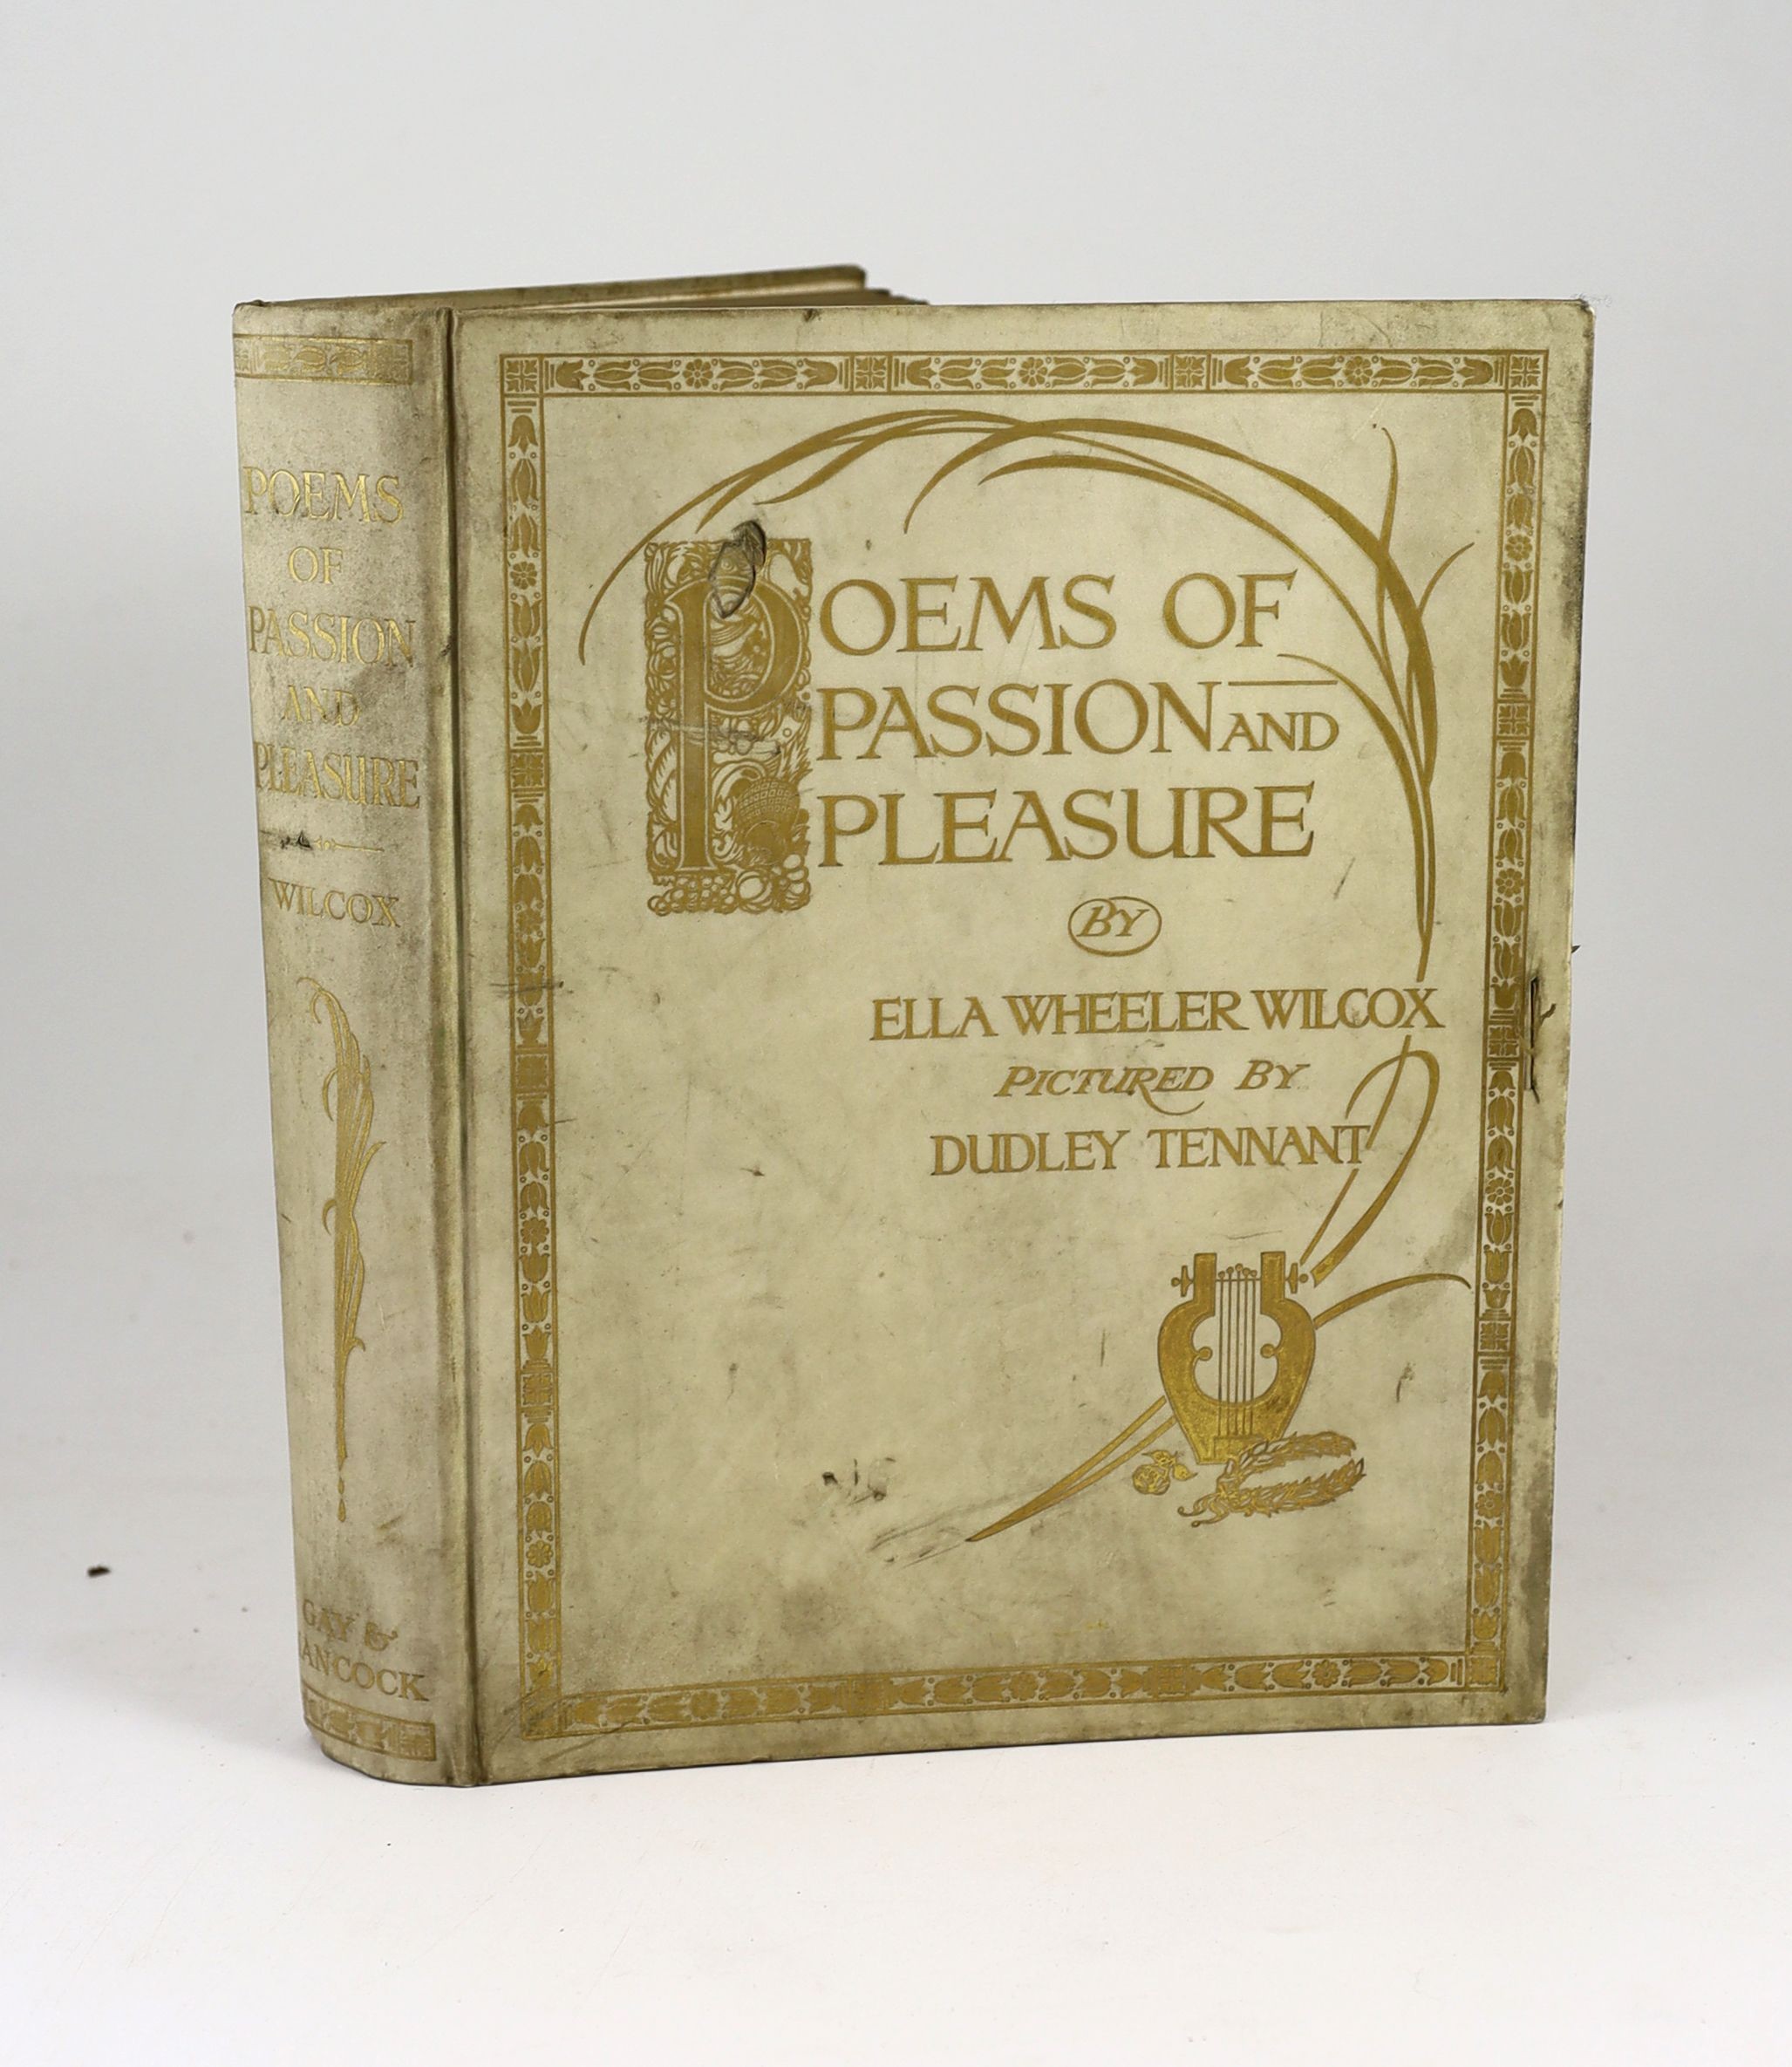 Wilcox, Ella Wheeler - Poems of Passion and Pleasure, de luxe issue, one of 500, signed by the poet and the illustrator, Dudley Tenant, with 20 tipped-in colour plates, 4to, vellum gilt, Gay and Hancock, London, [1912]